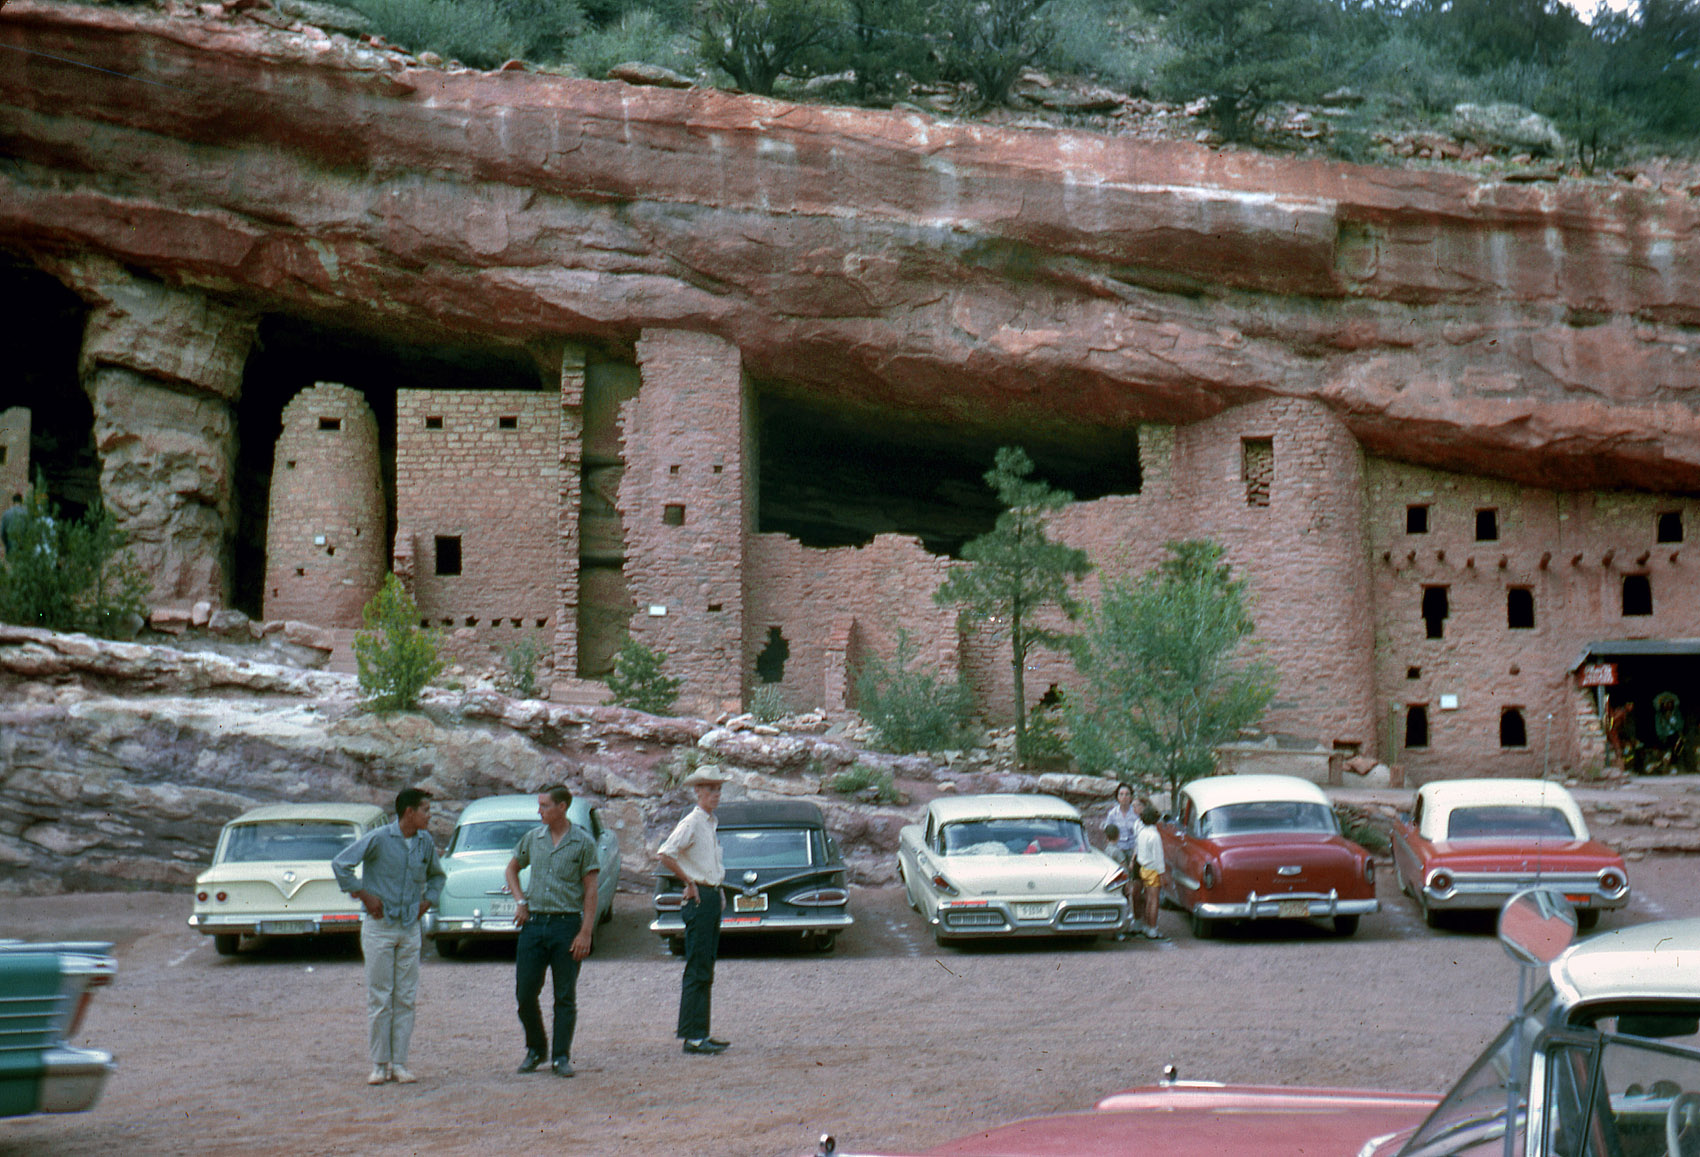 The Manitou cliff dwellings west of Colorado Springs. This was taken on my grandparents' honeymoon out west in 1962. View full size.